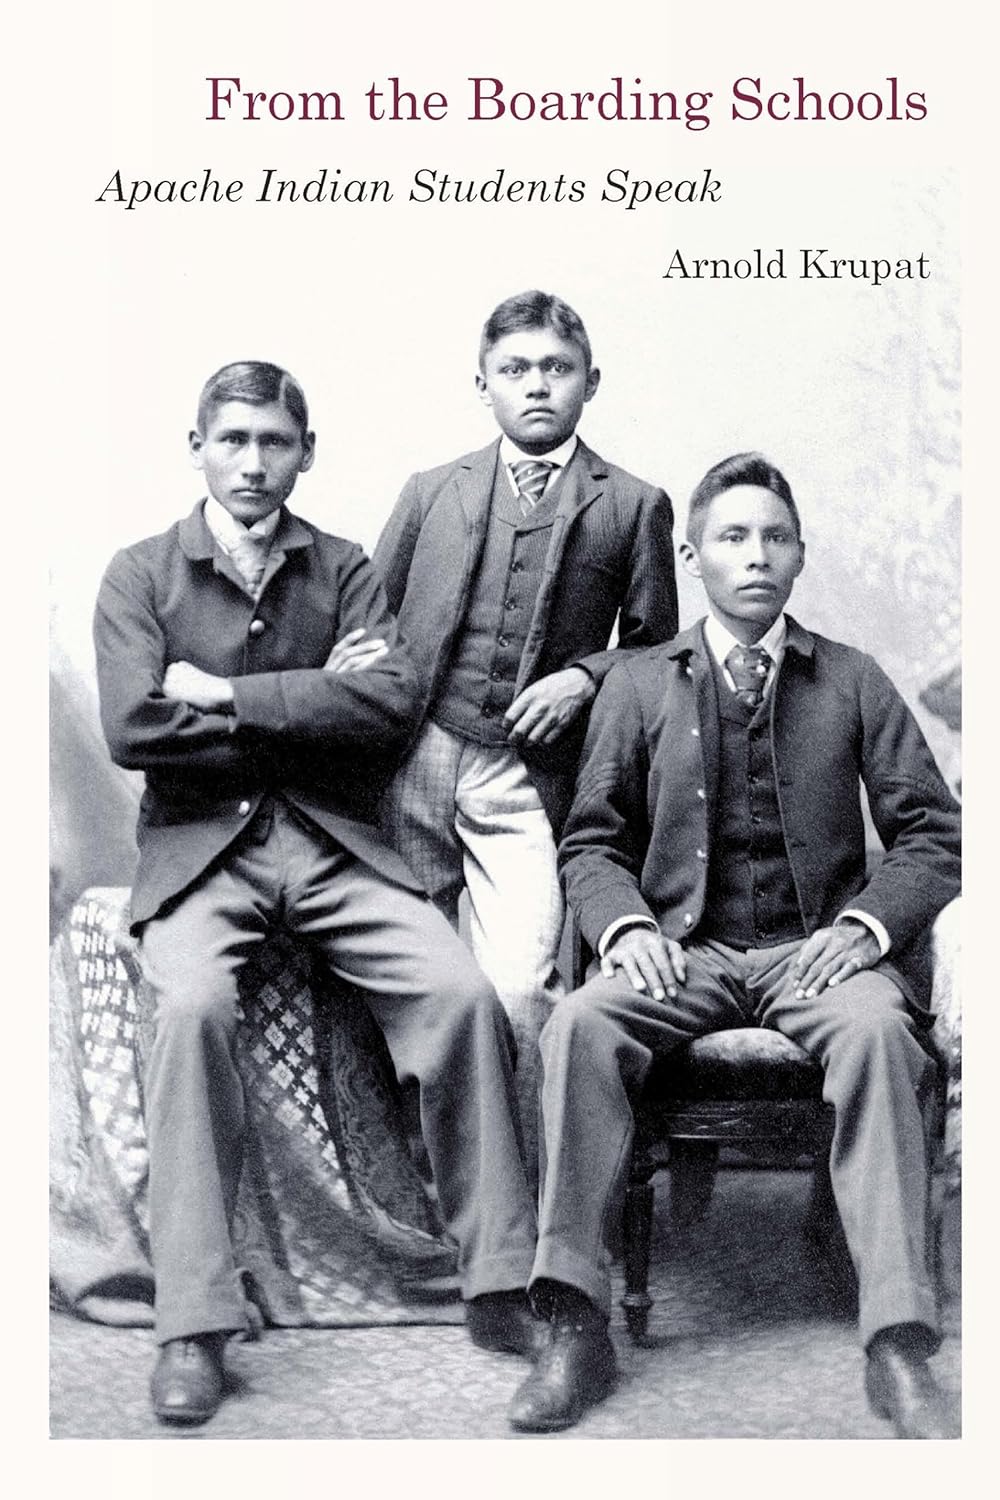 From the Boarding Schools: Apache Indian Students Speak by Arnold Krupat